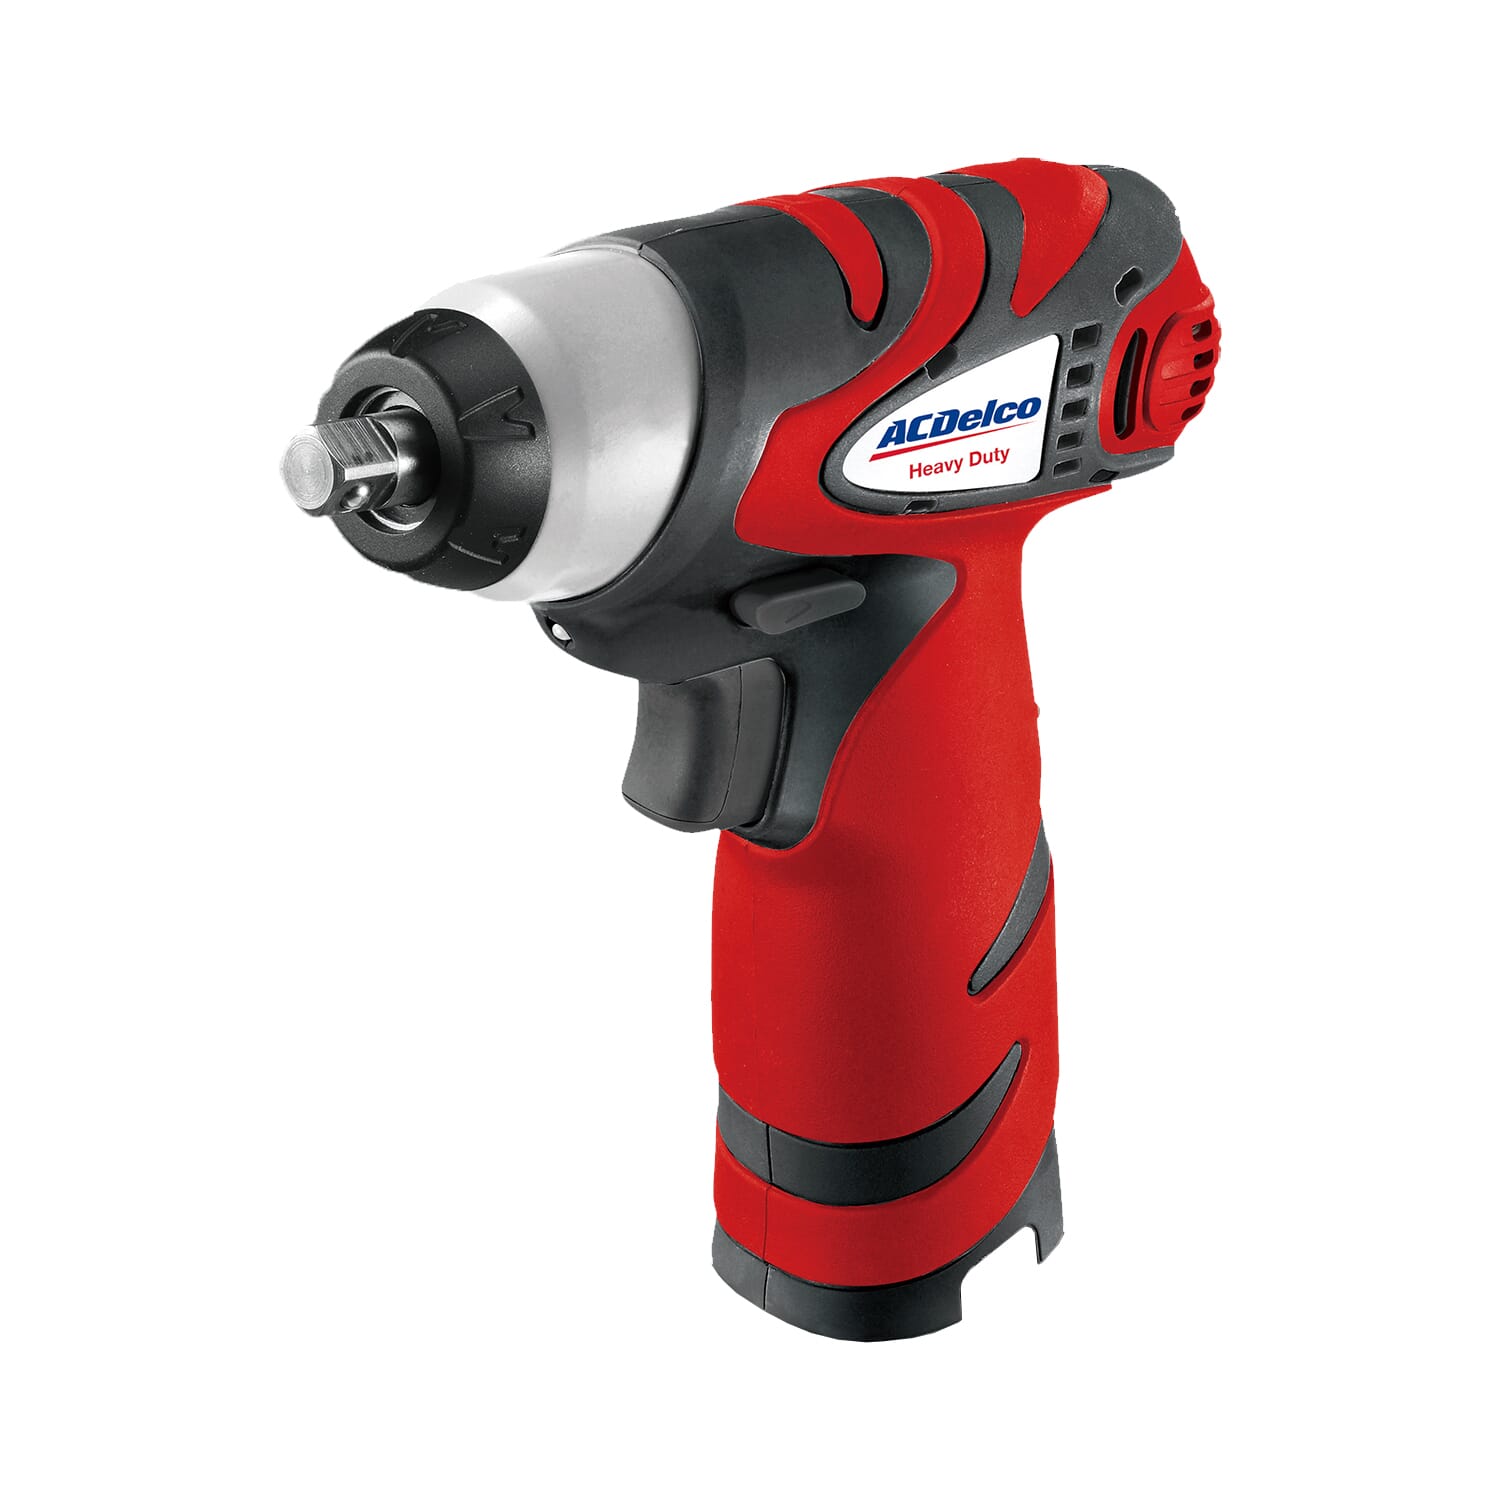 ARI810T Lithium-Ion 8V 3/8" Super Compact Impact Wrench Power Tool - Tool Only